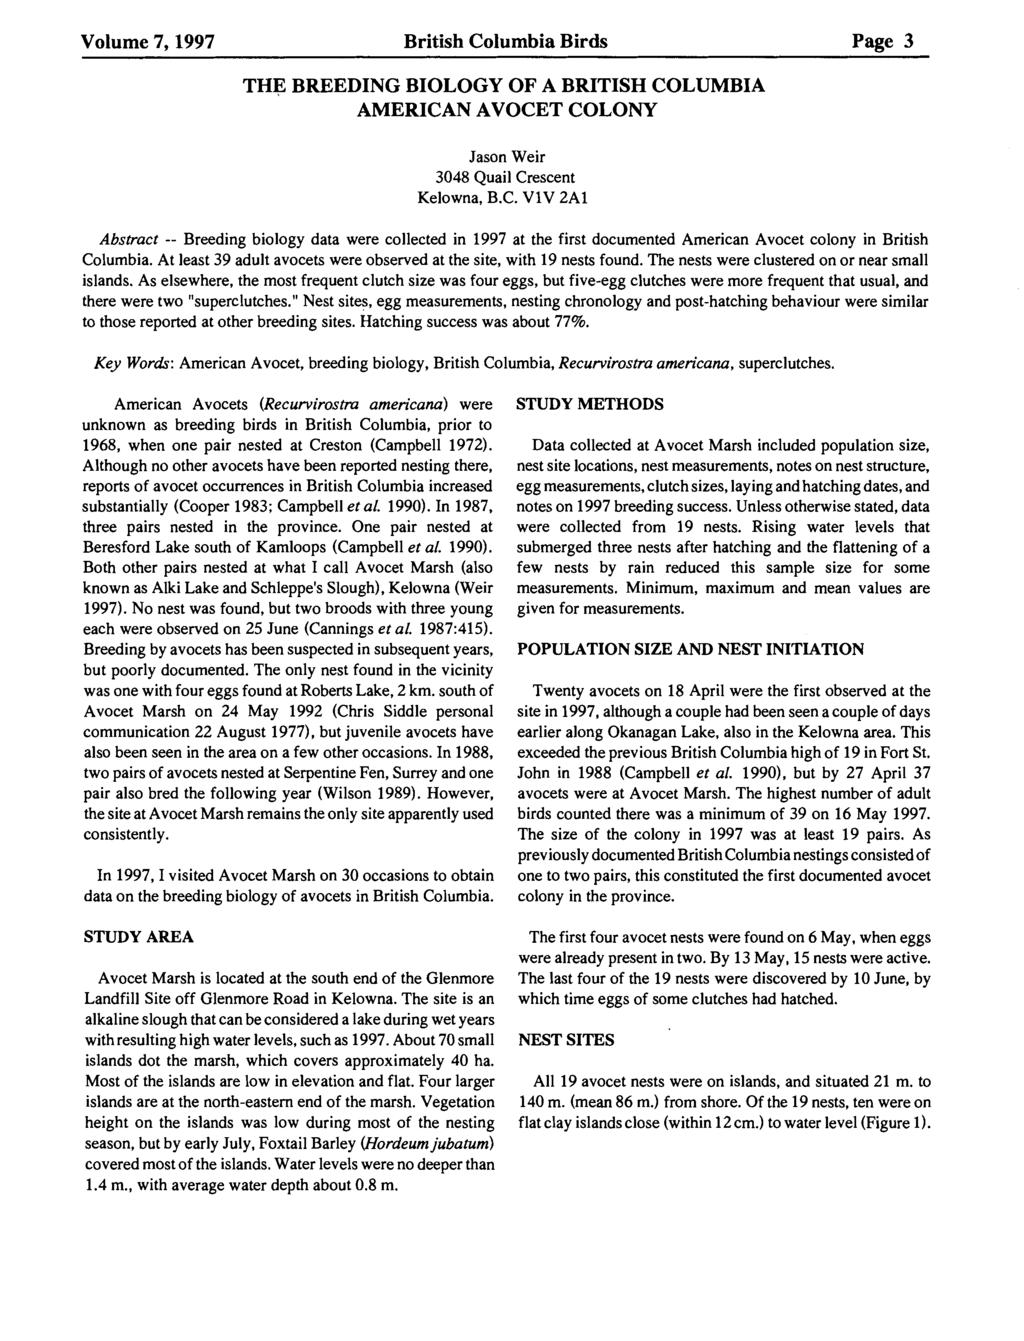 Volume 7,1997 British Columbia Birds Page 3 THE BREEDING BIOLOGY OF A BRITISH COLUMBIA AMERICAN AVOCET COLONY Jason Weir 3048 Quail Crescent Kelowna, B.C. V1V 2A1 Abstract -- Breeding biology data were collected in 1997 at the first documented American Avocet colony in British Columbia.